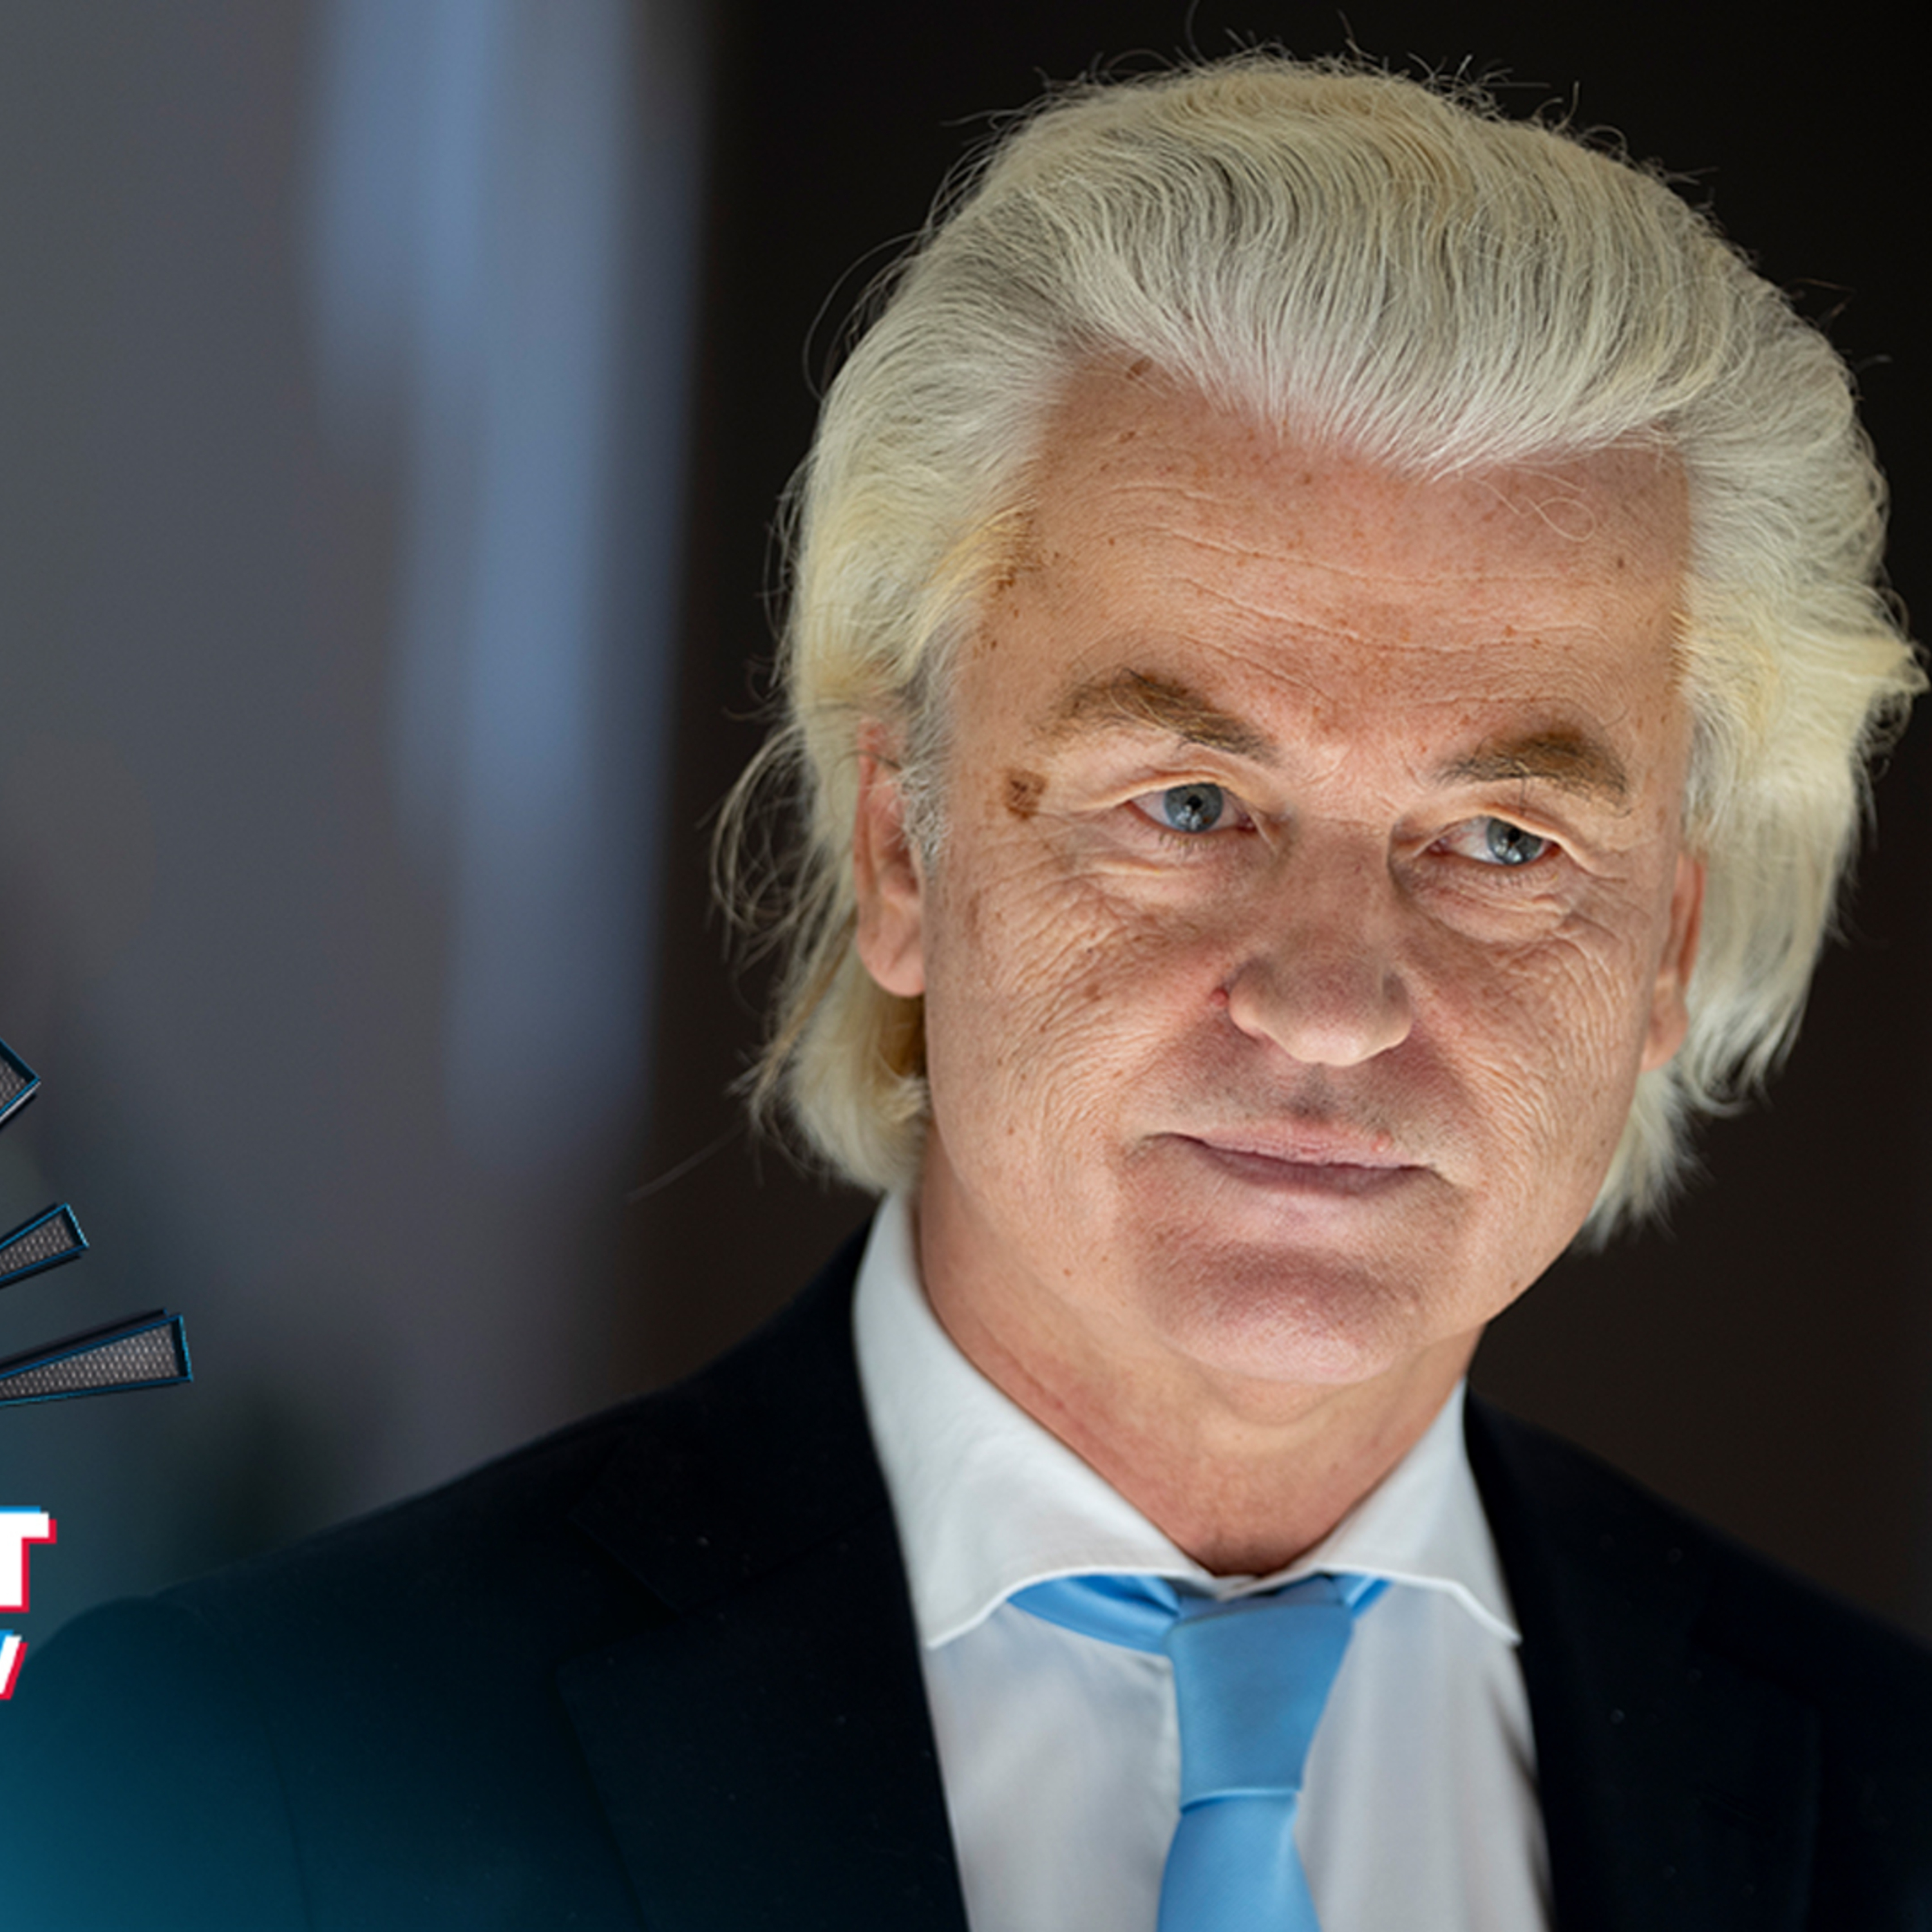 EZRA LEVANT | Can Geert Wilders overcome the 'globalist elite' to form government?